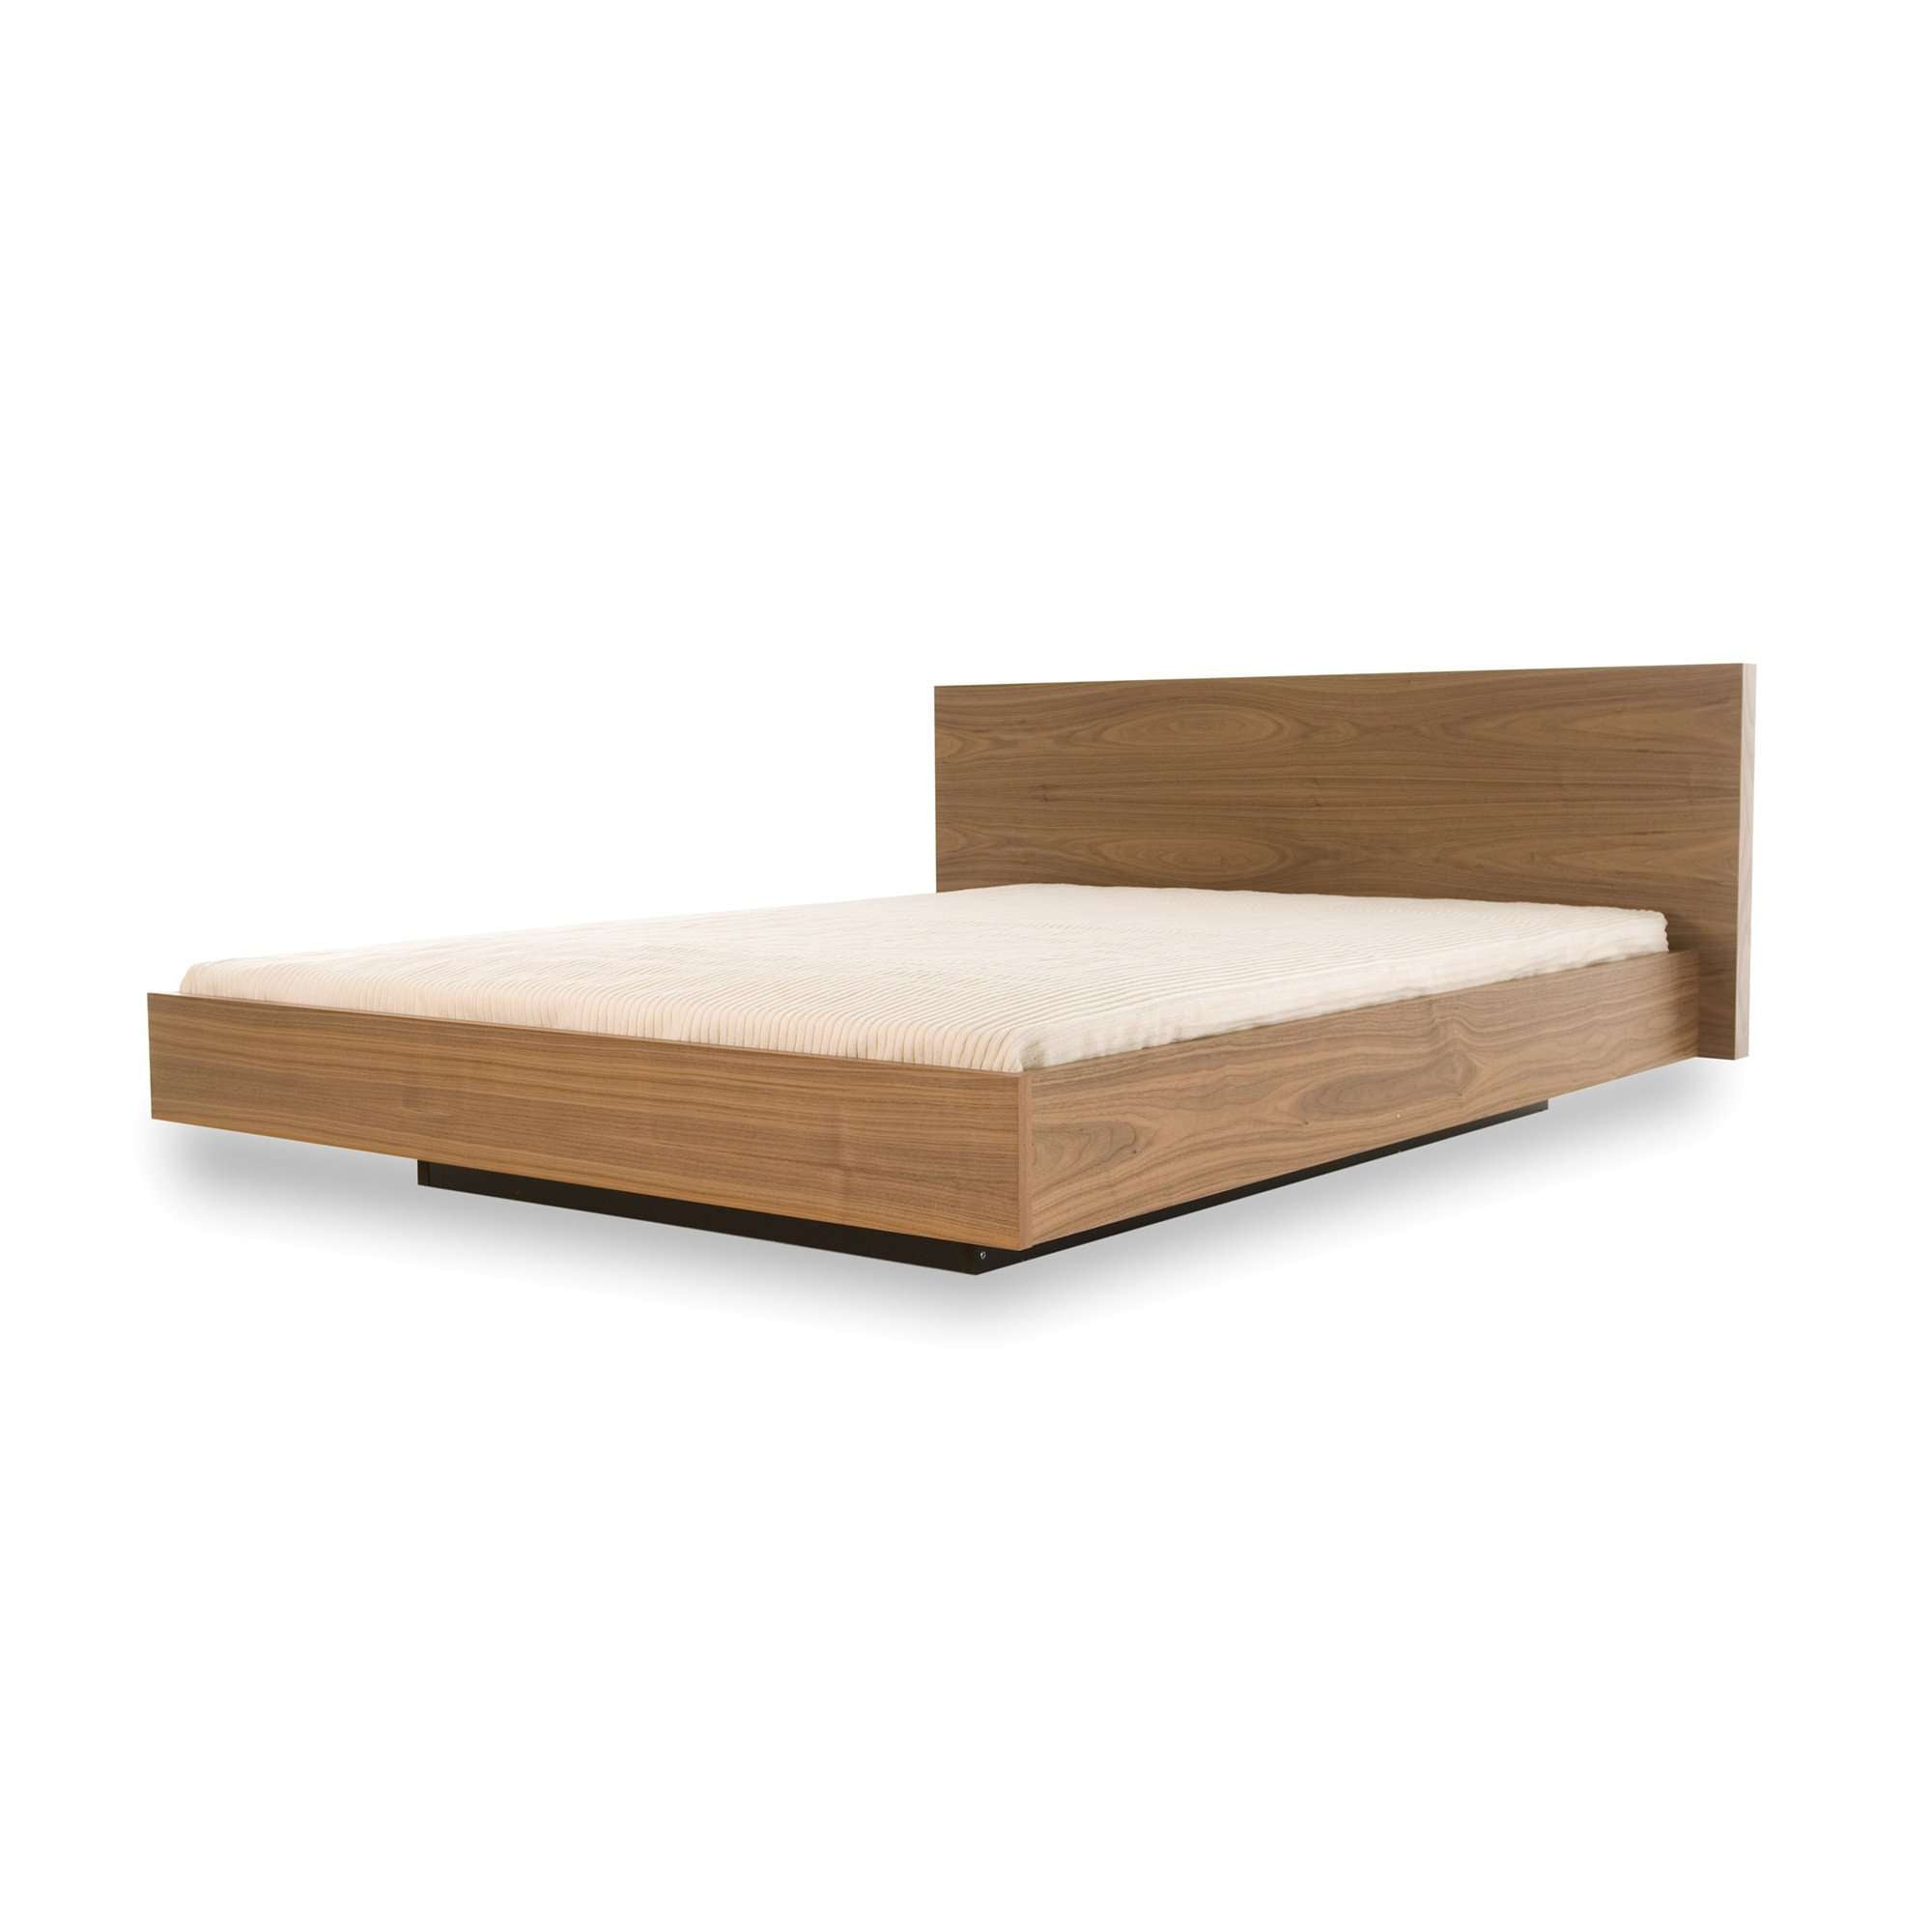 Tema Home-Float Bed - Queen Size w/ Mattress Support 044017-FLOATQM-Bed-MODTEMPO